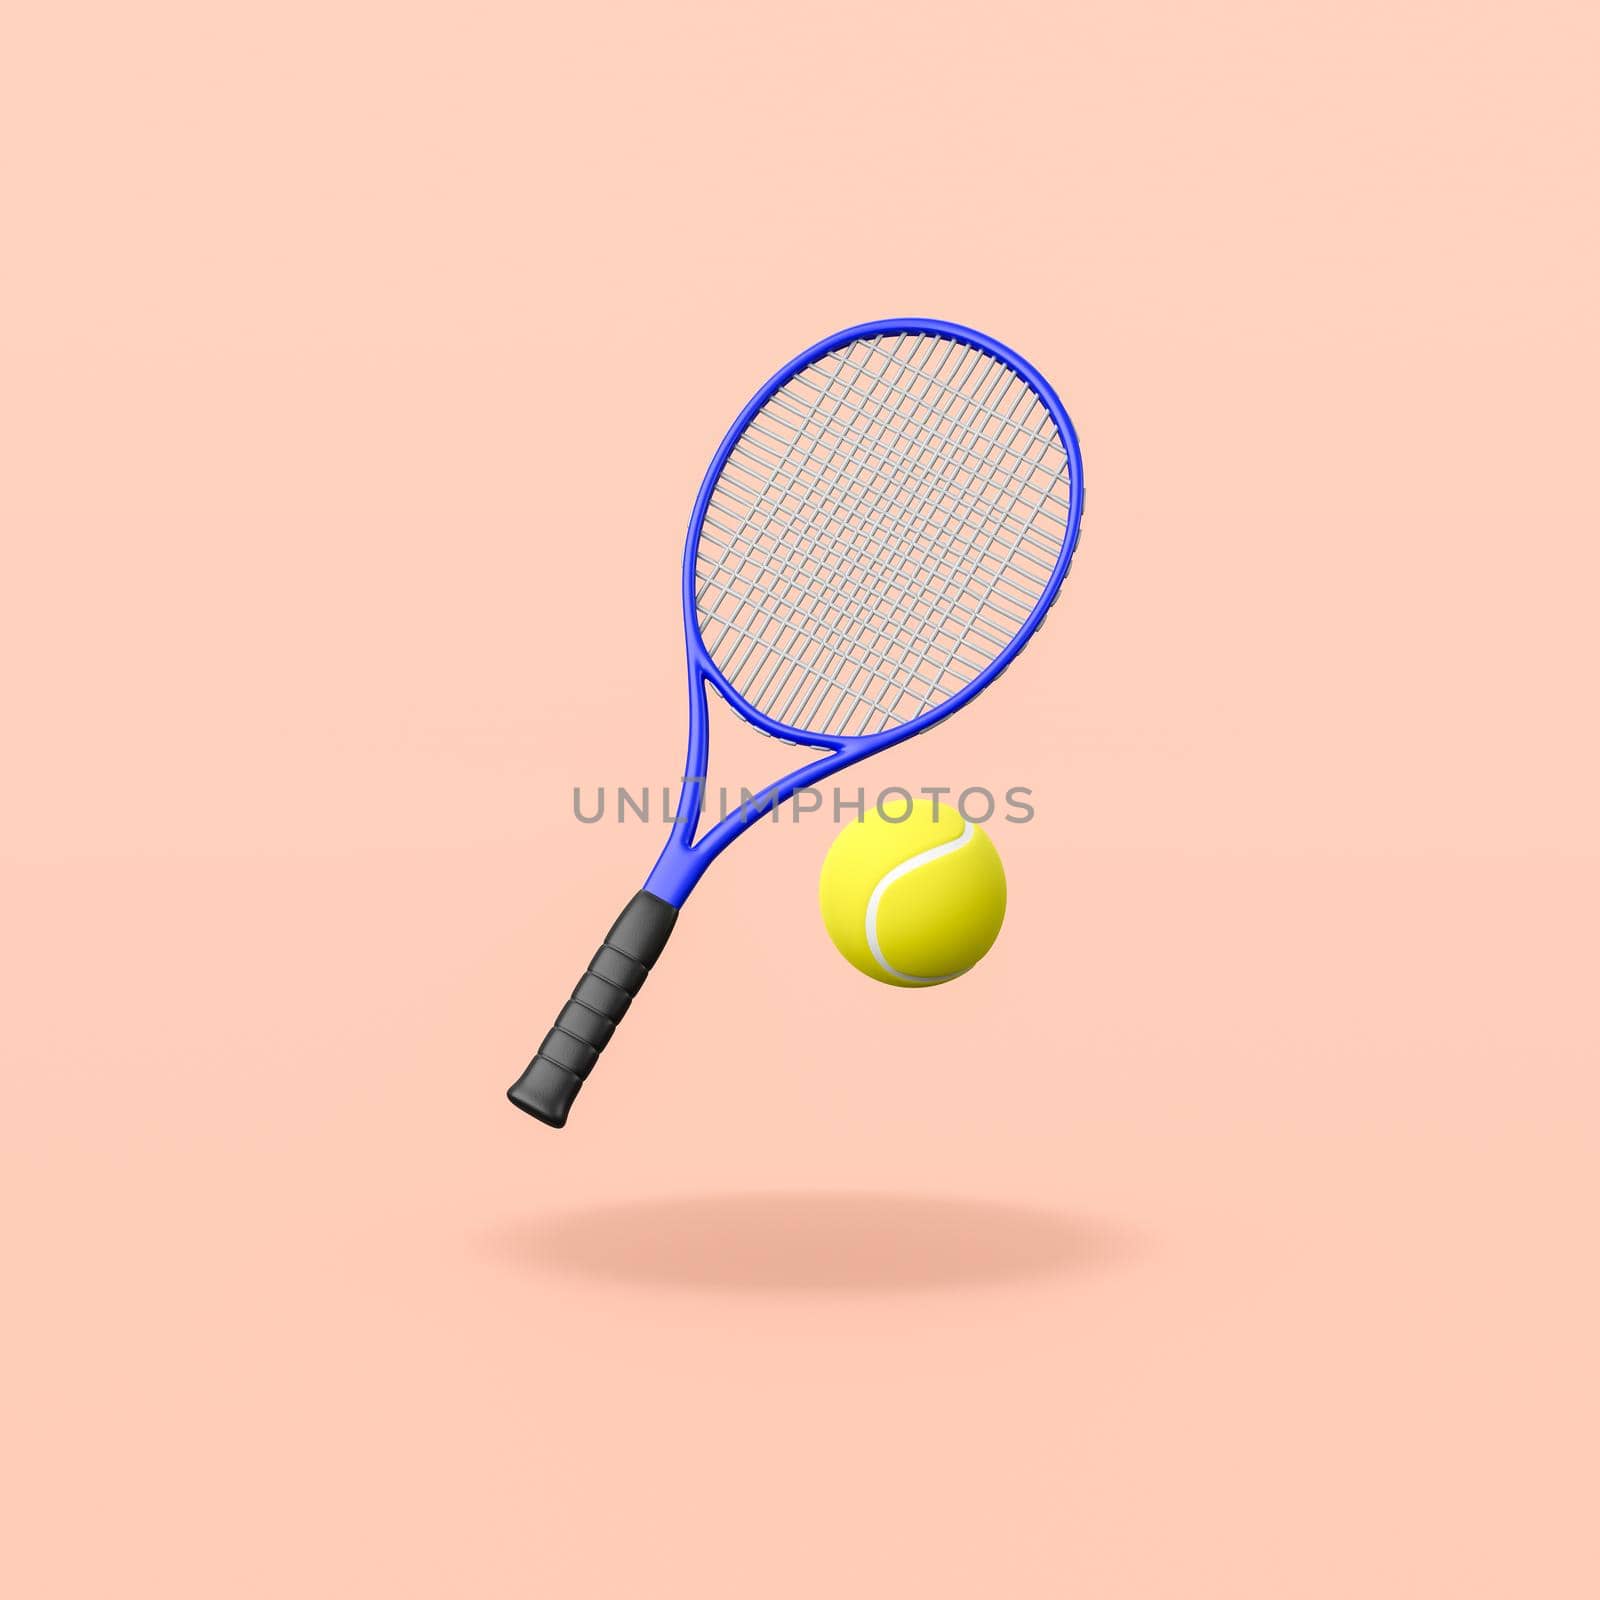 Tennis Racket and Ball Isolated on Flat Orange Background with Shadow 3D Illustration